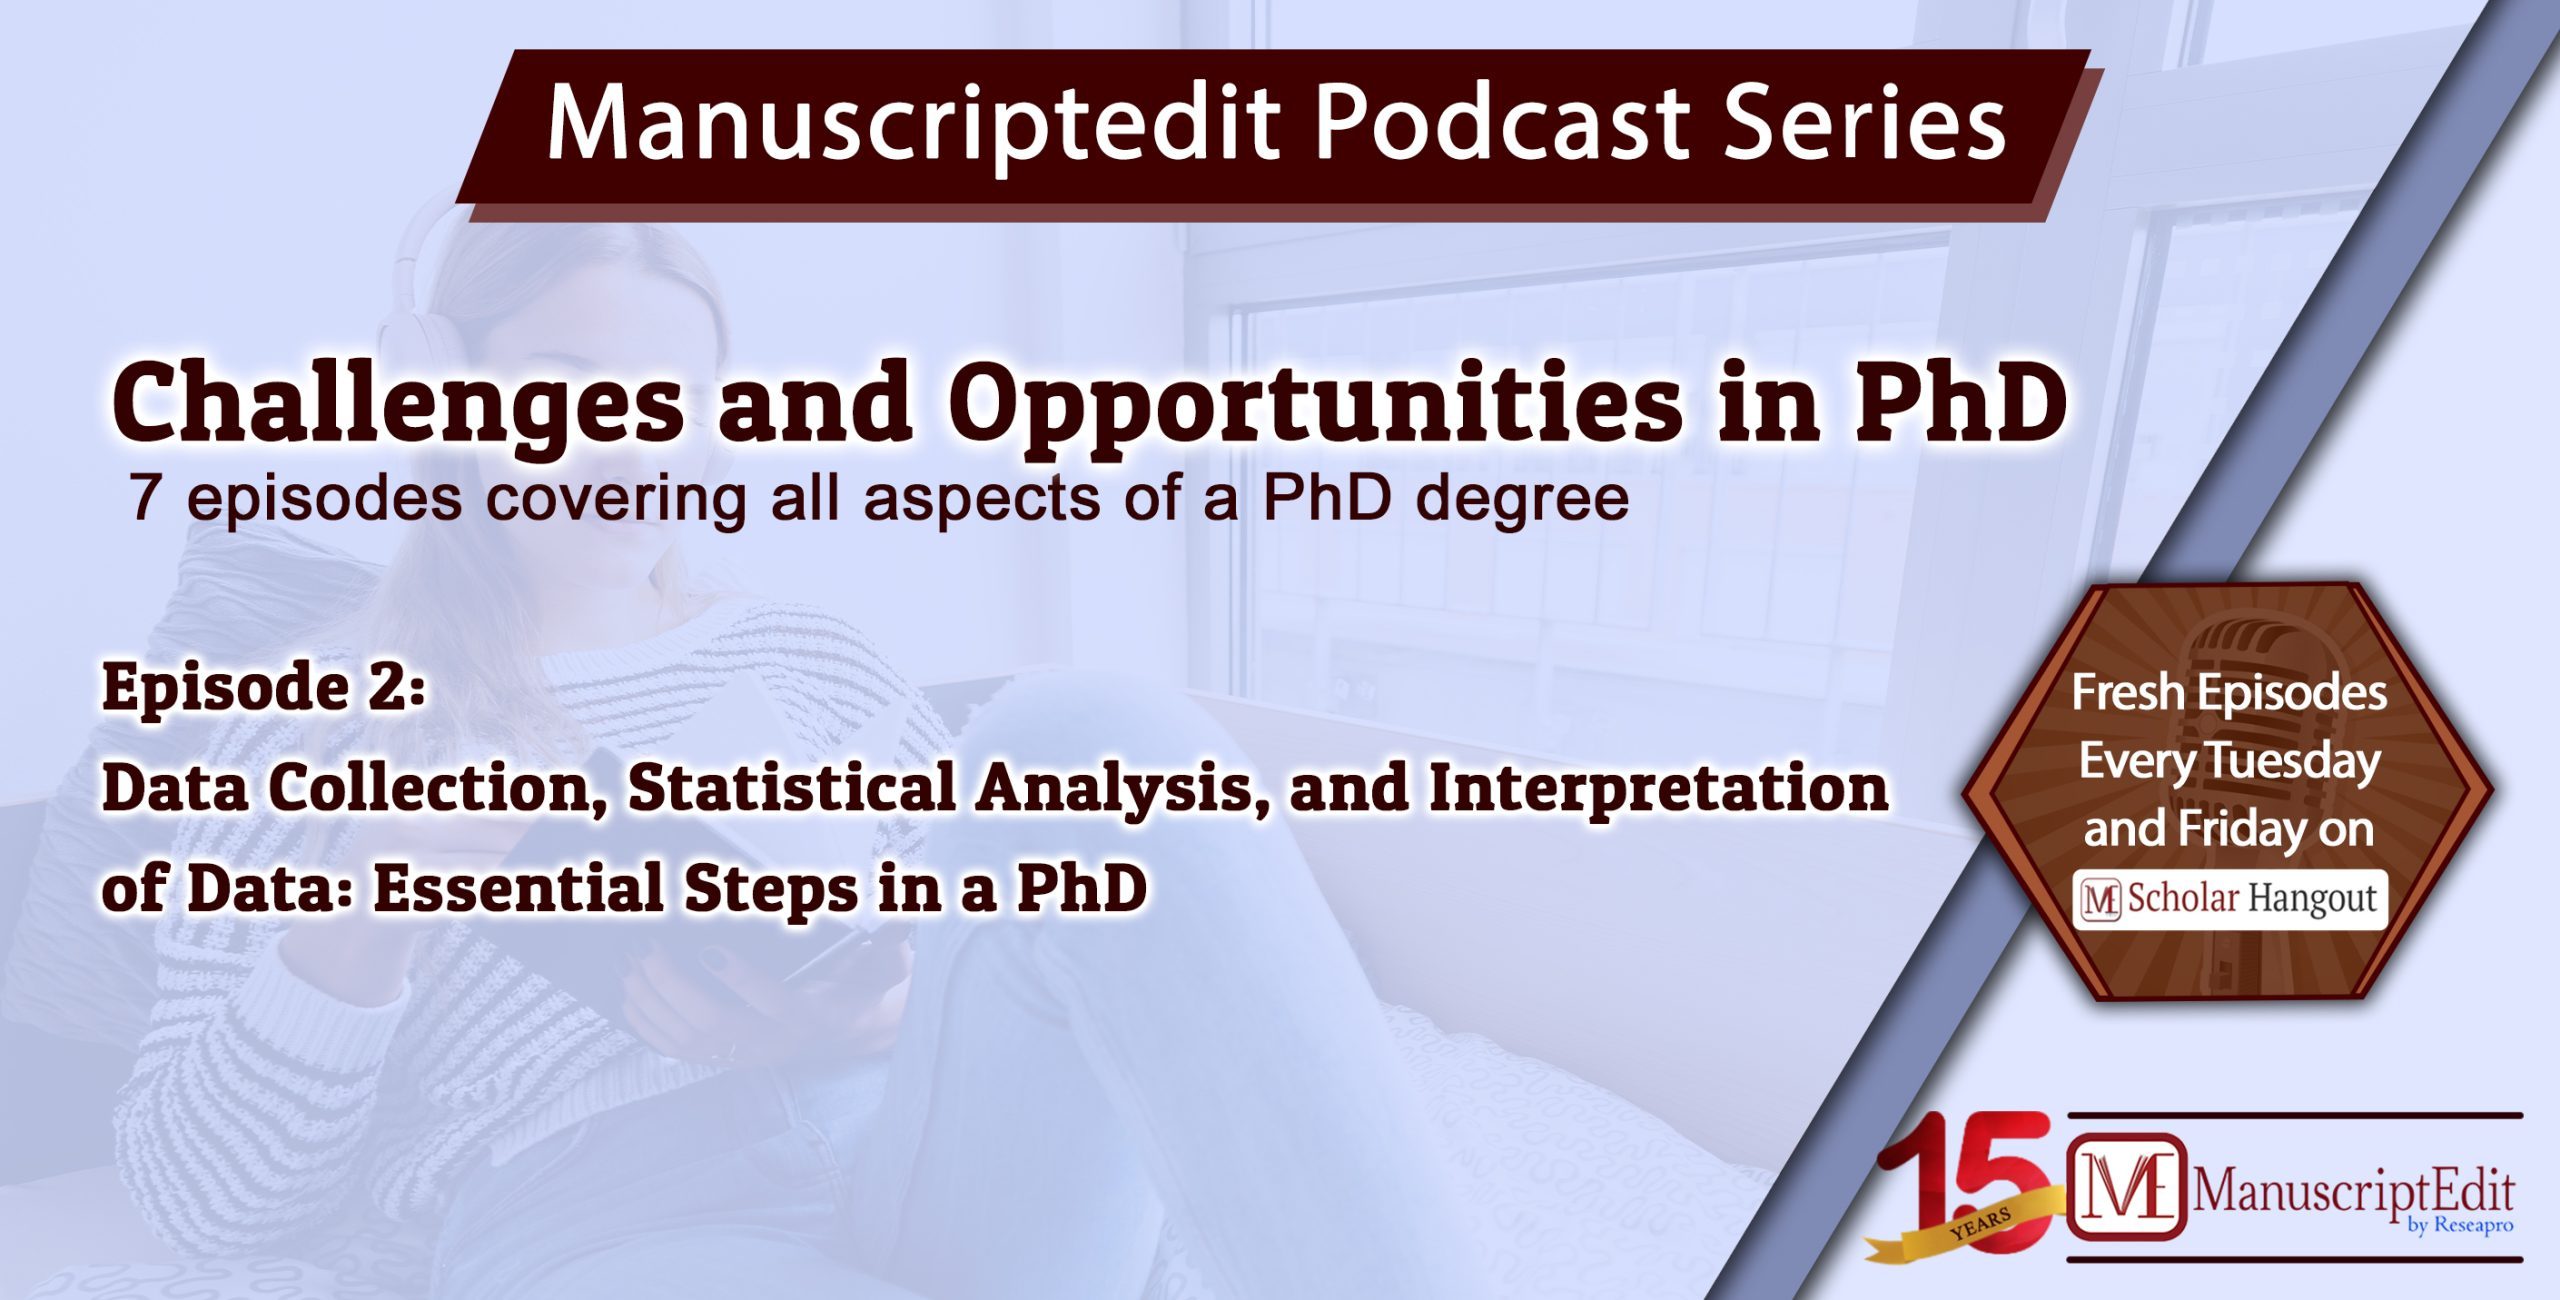 Episode 2: Data Collection, Statistical Analysis, and Interpretation of Data: Essential Steps in a PhD